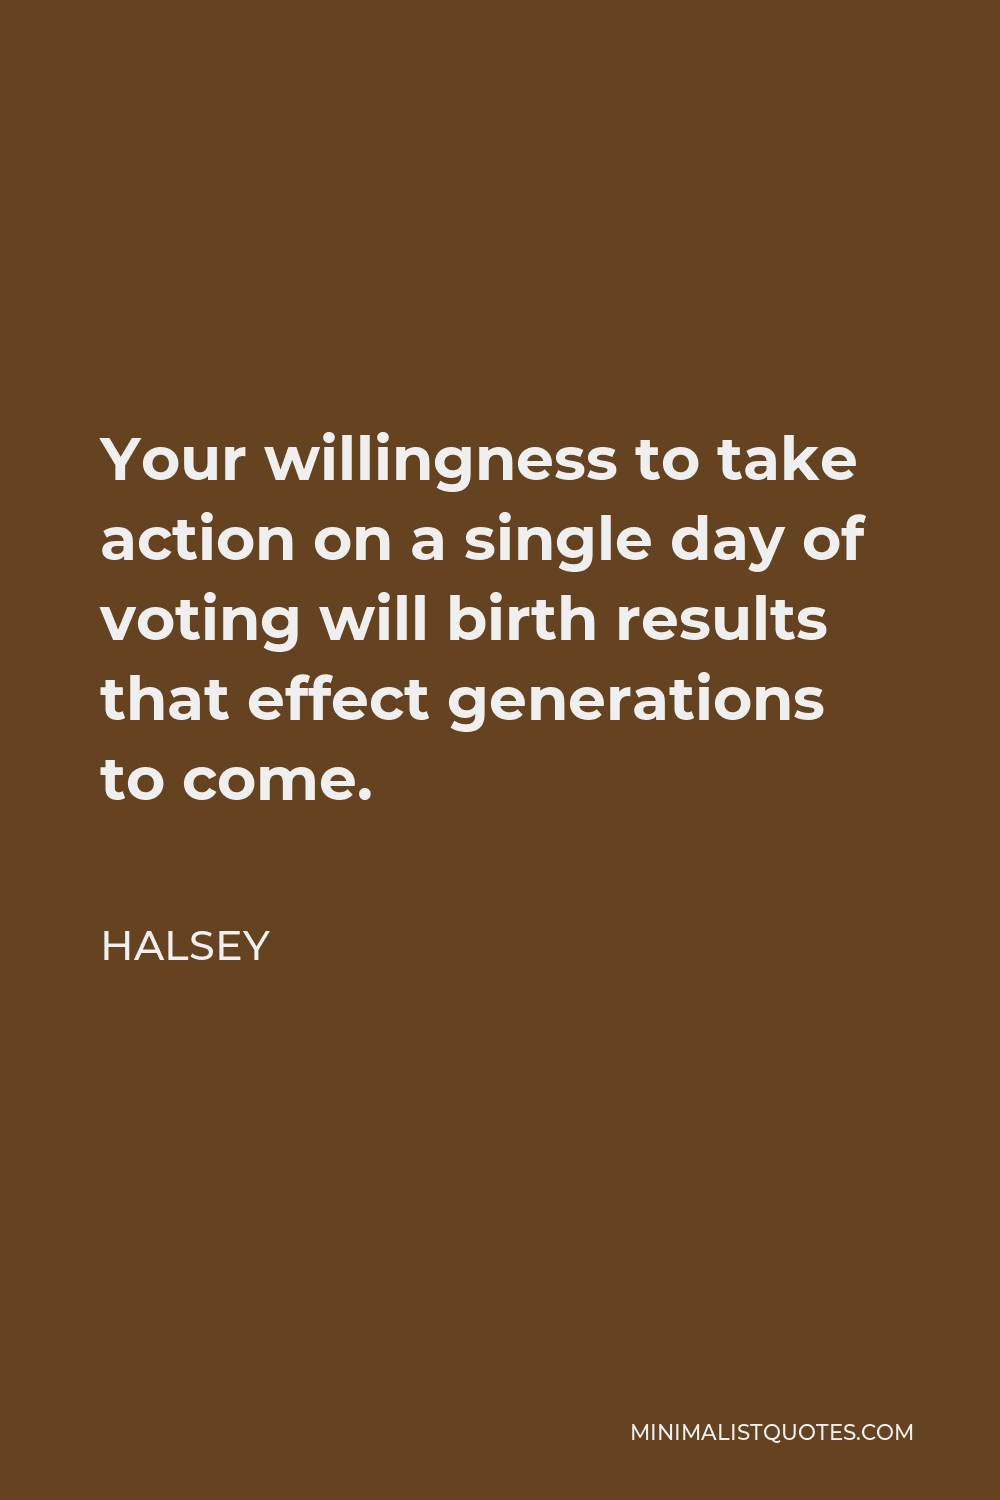 Halsey Quote - Your willingness to take action on a single day of voting will birth results that effect generations to come.